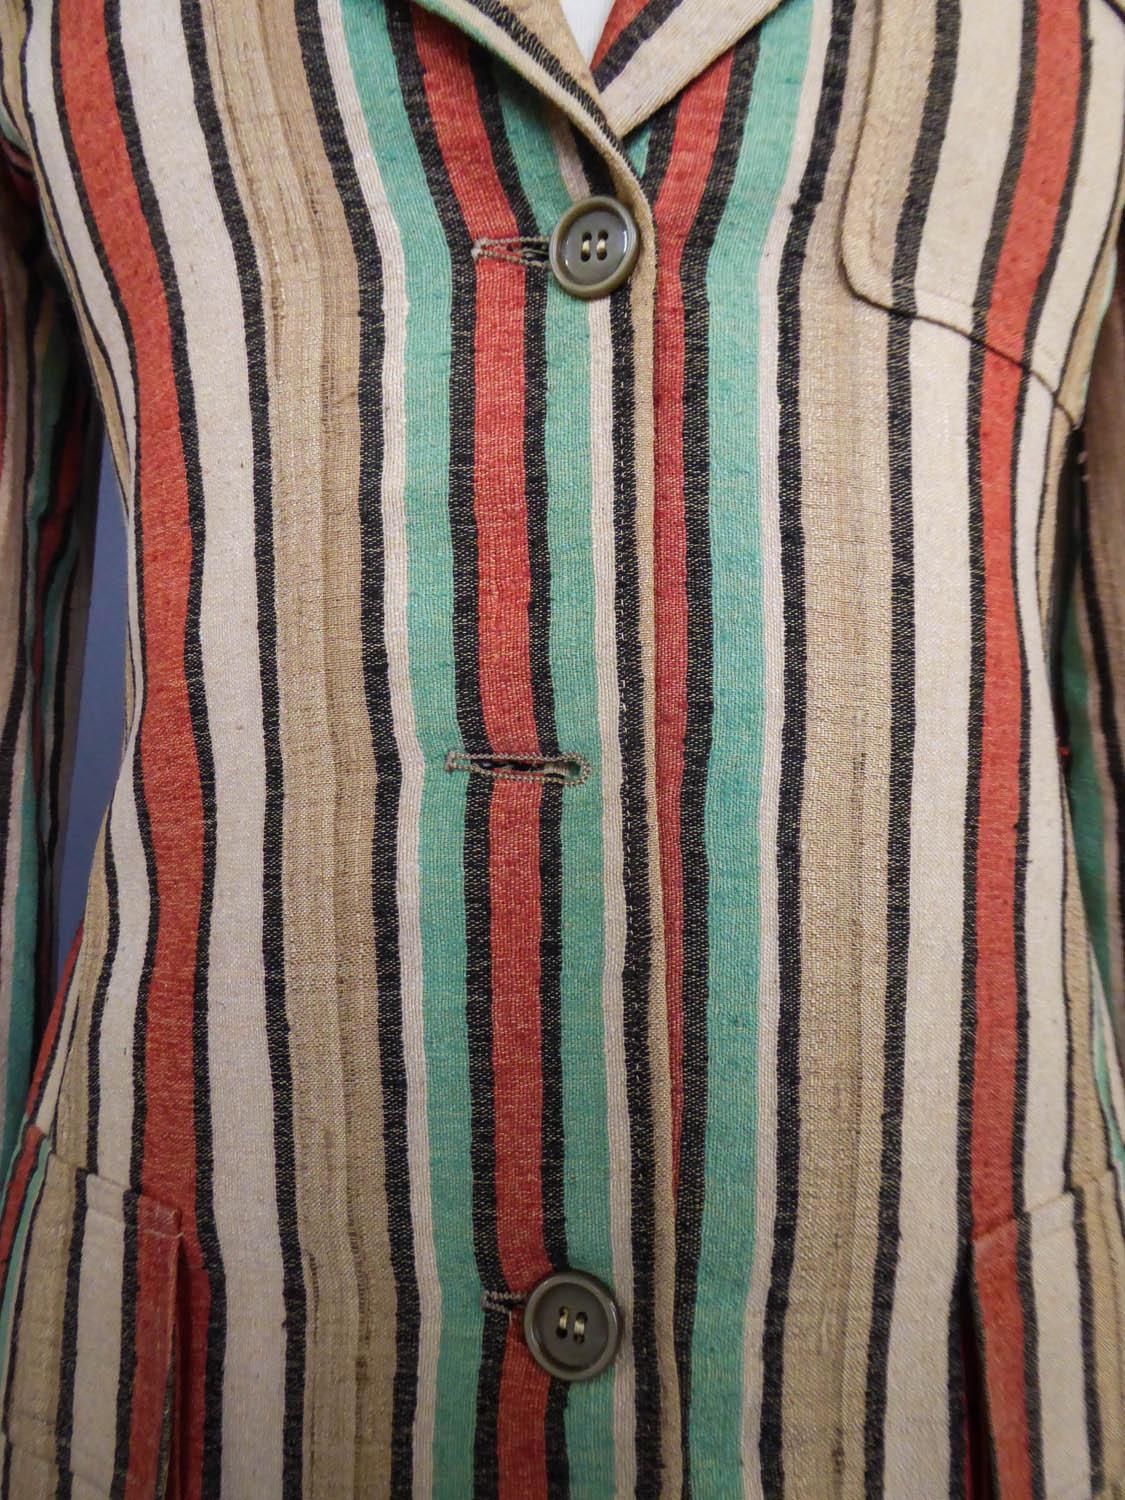 Women's or Men's Ted Lapidus Raw Striped Silk Jacket, Circa 1975 For Sale